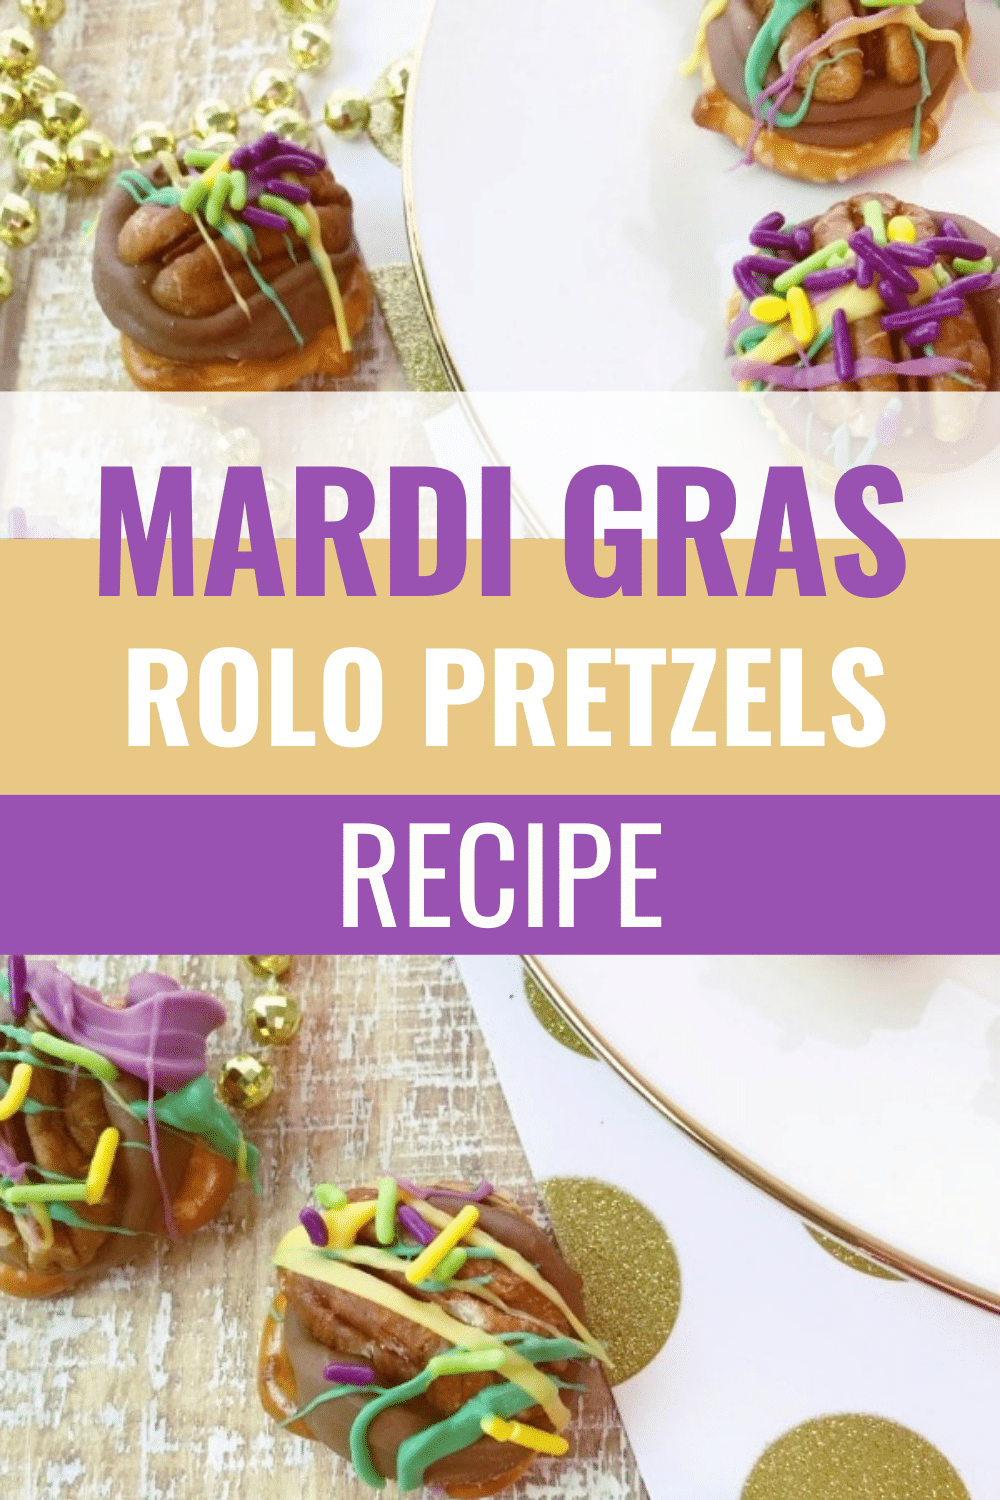 Mardi Gras Rolo Pretzels are a great treat for celebrating Fat Tuesday. These have the perfect combo of nuts, caramel, chocolate and pretzels. #mardigras #turtlepretzels #dessert via @wondermomwannab